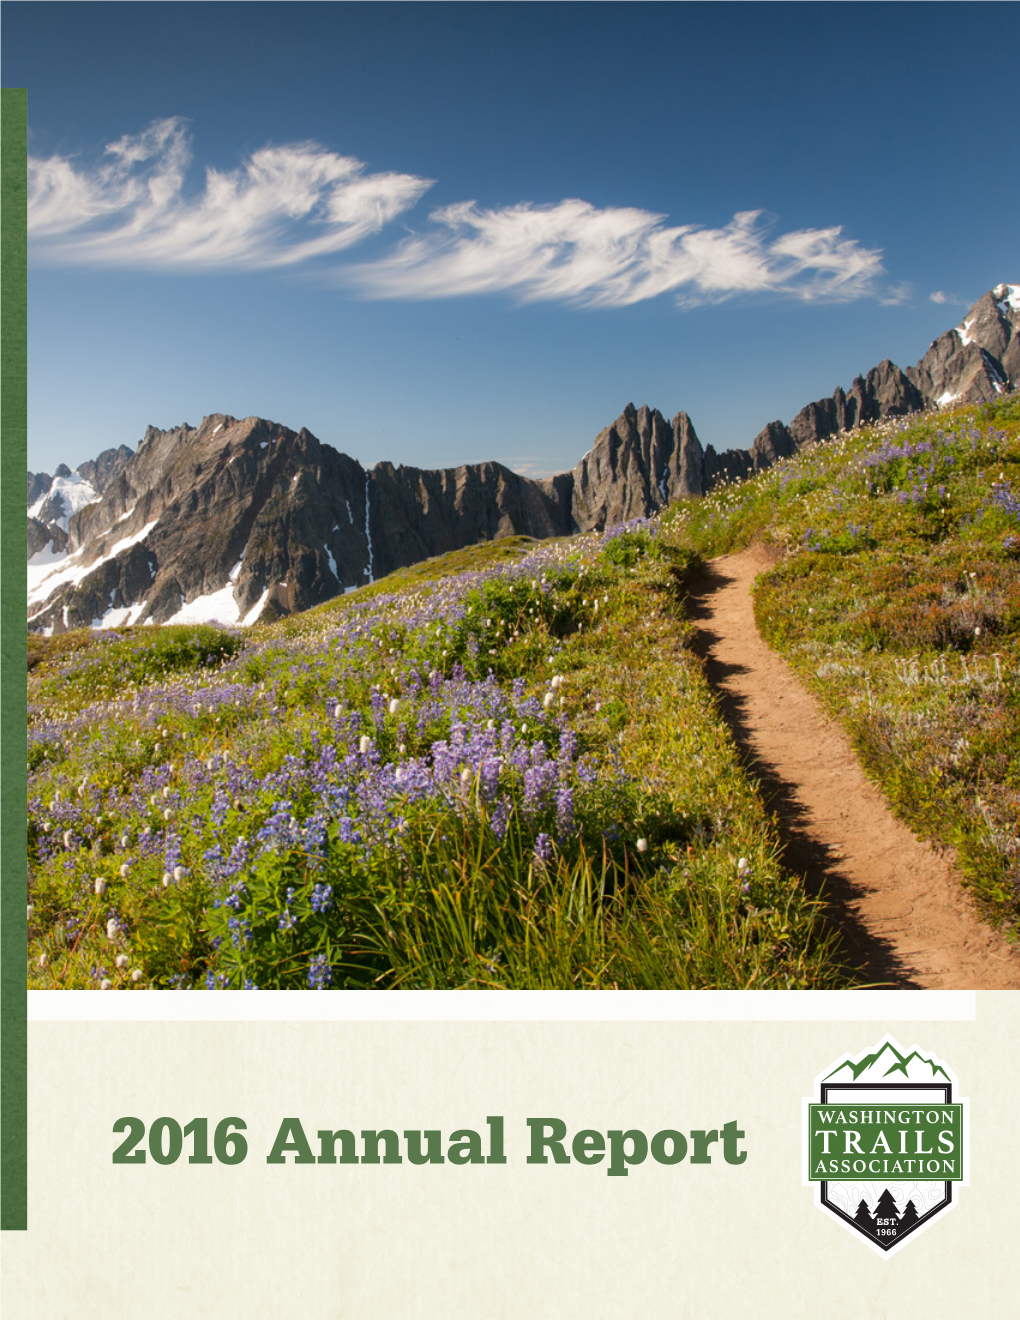 2016 Annual Report 2016 Was a Year of Celebration for Washington Trails Association